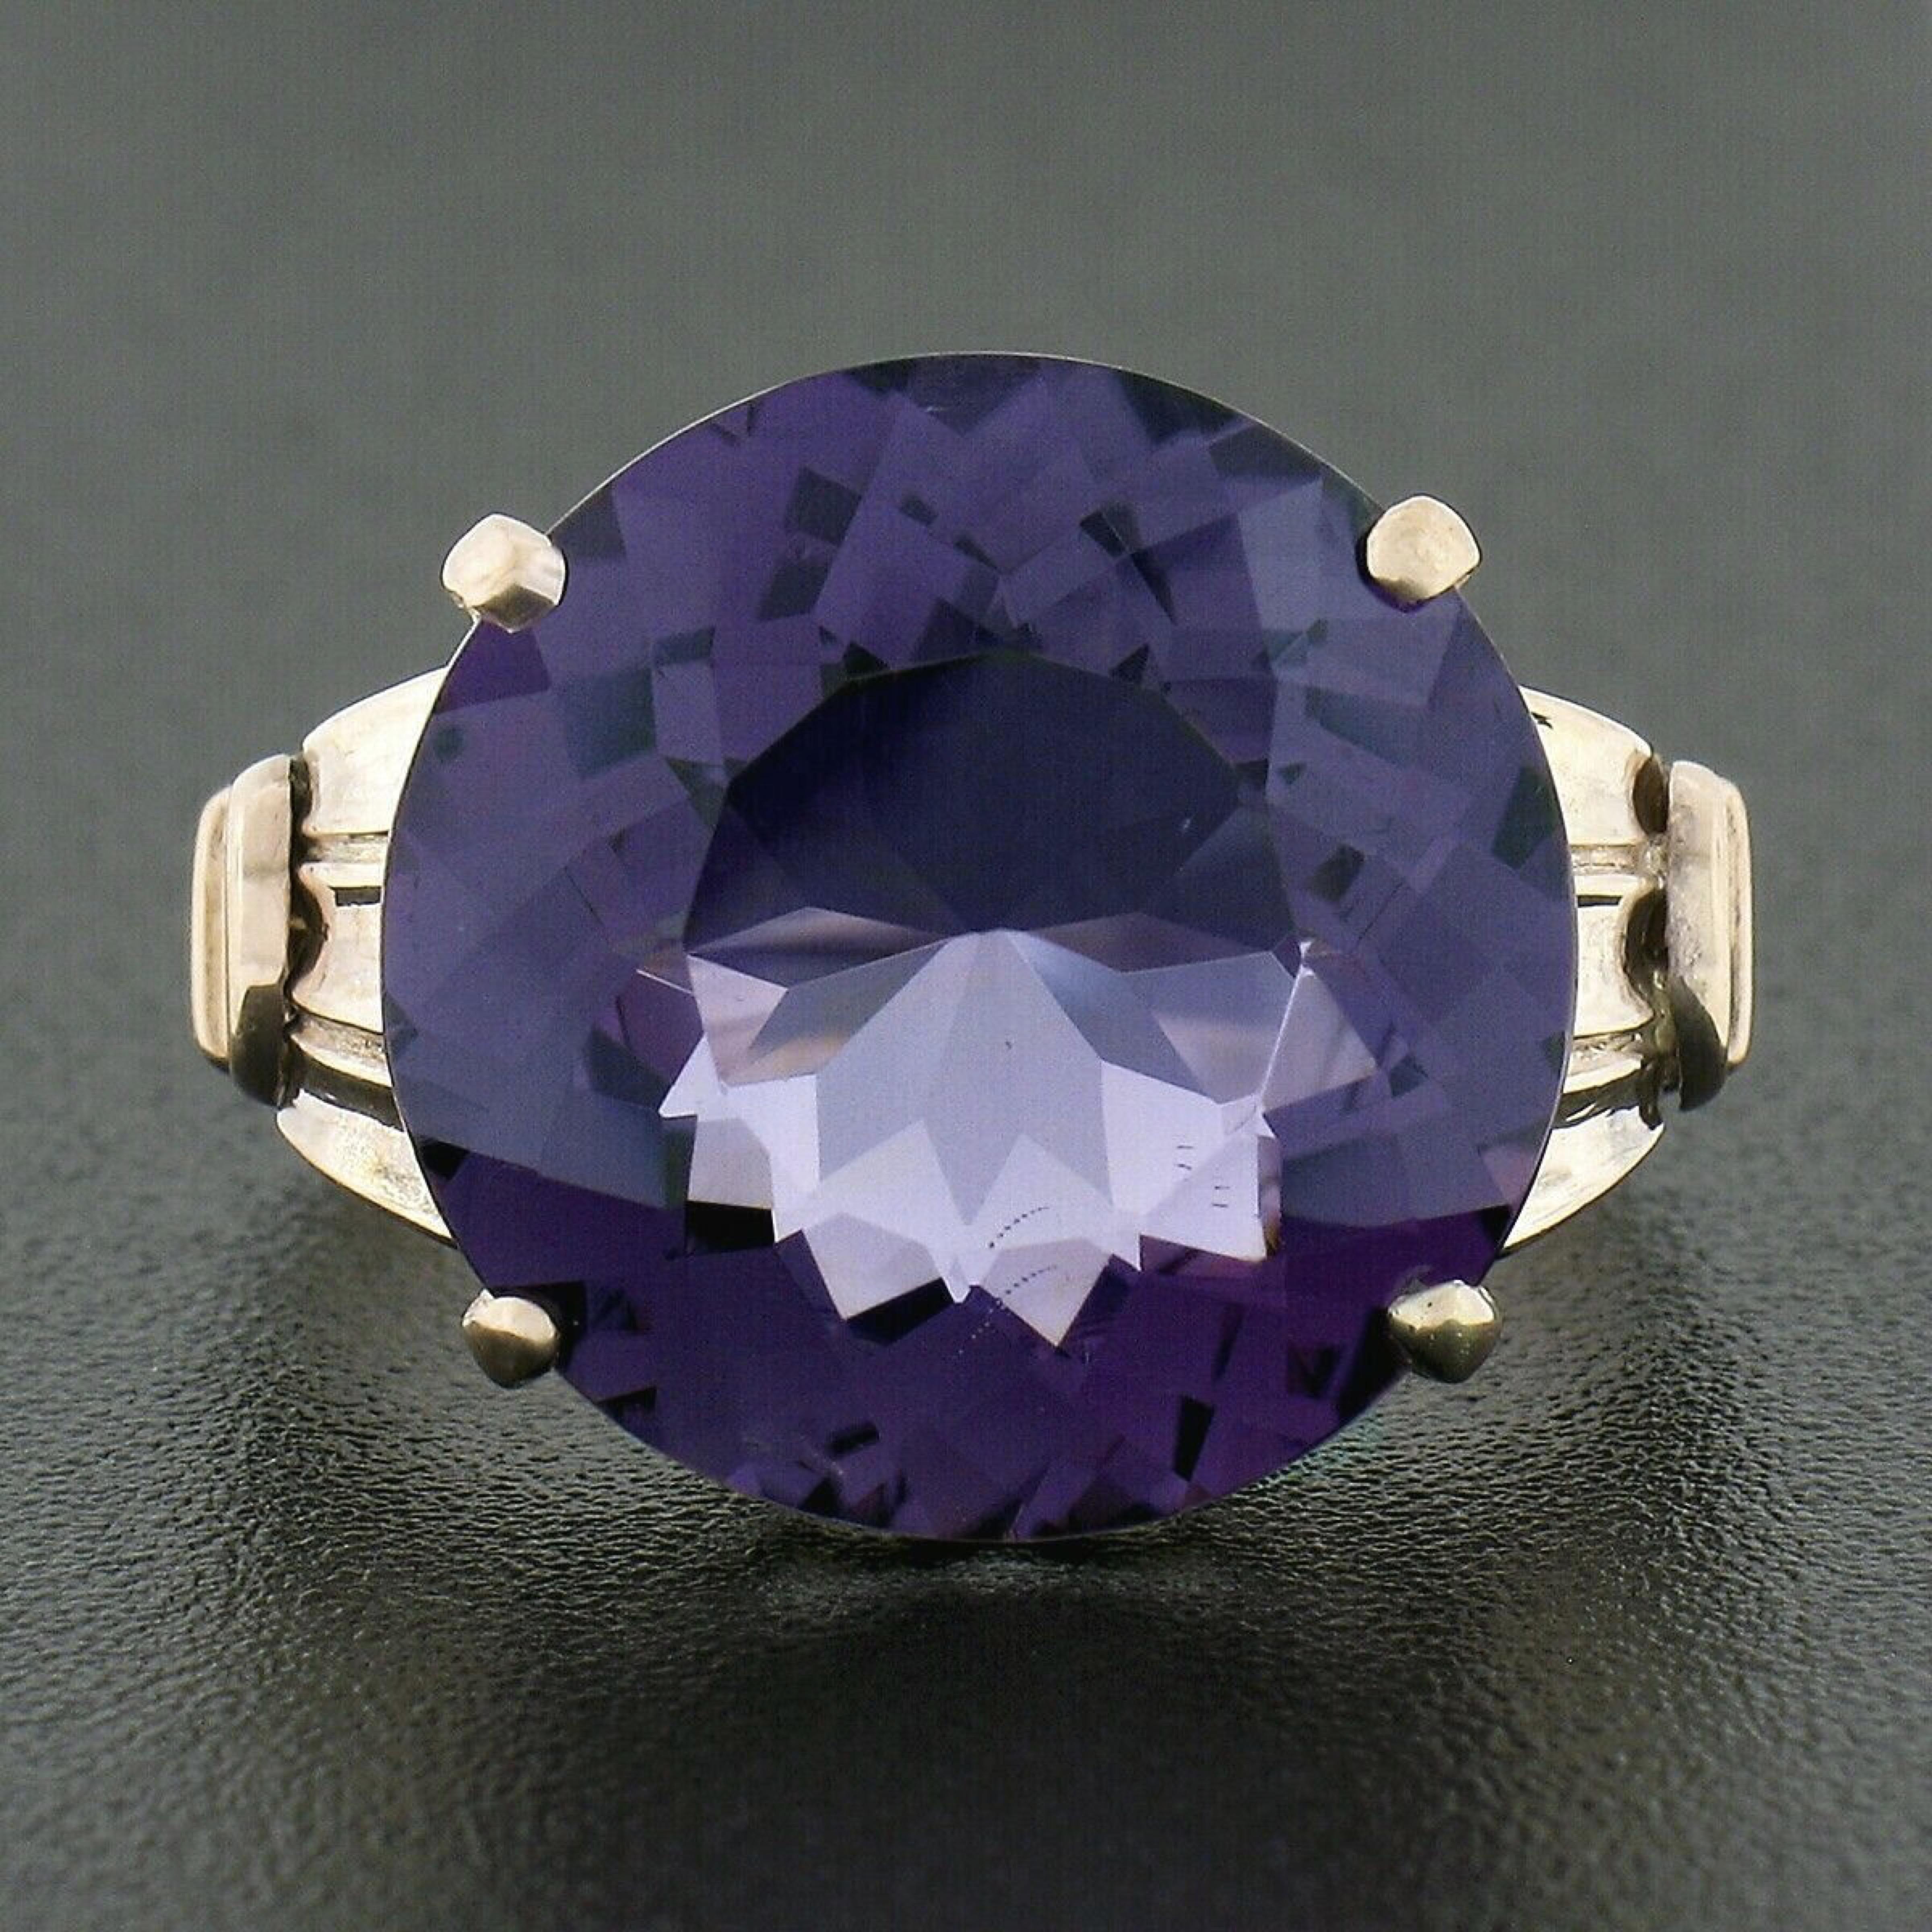 Here we have a stunning antique solitaire ring that was crafted during the Victorian era from solid 14k gold. It features a fine round brilliant cut amethyst that shows a large size, weighing approximately 8.75 carats, and displays a truly gorgeous